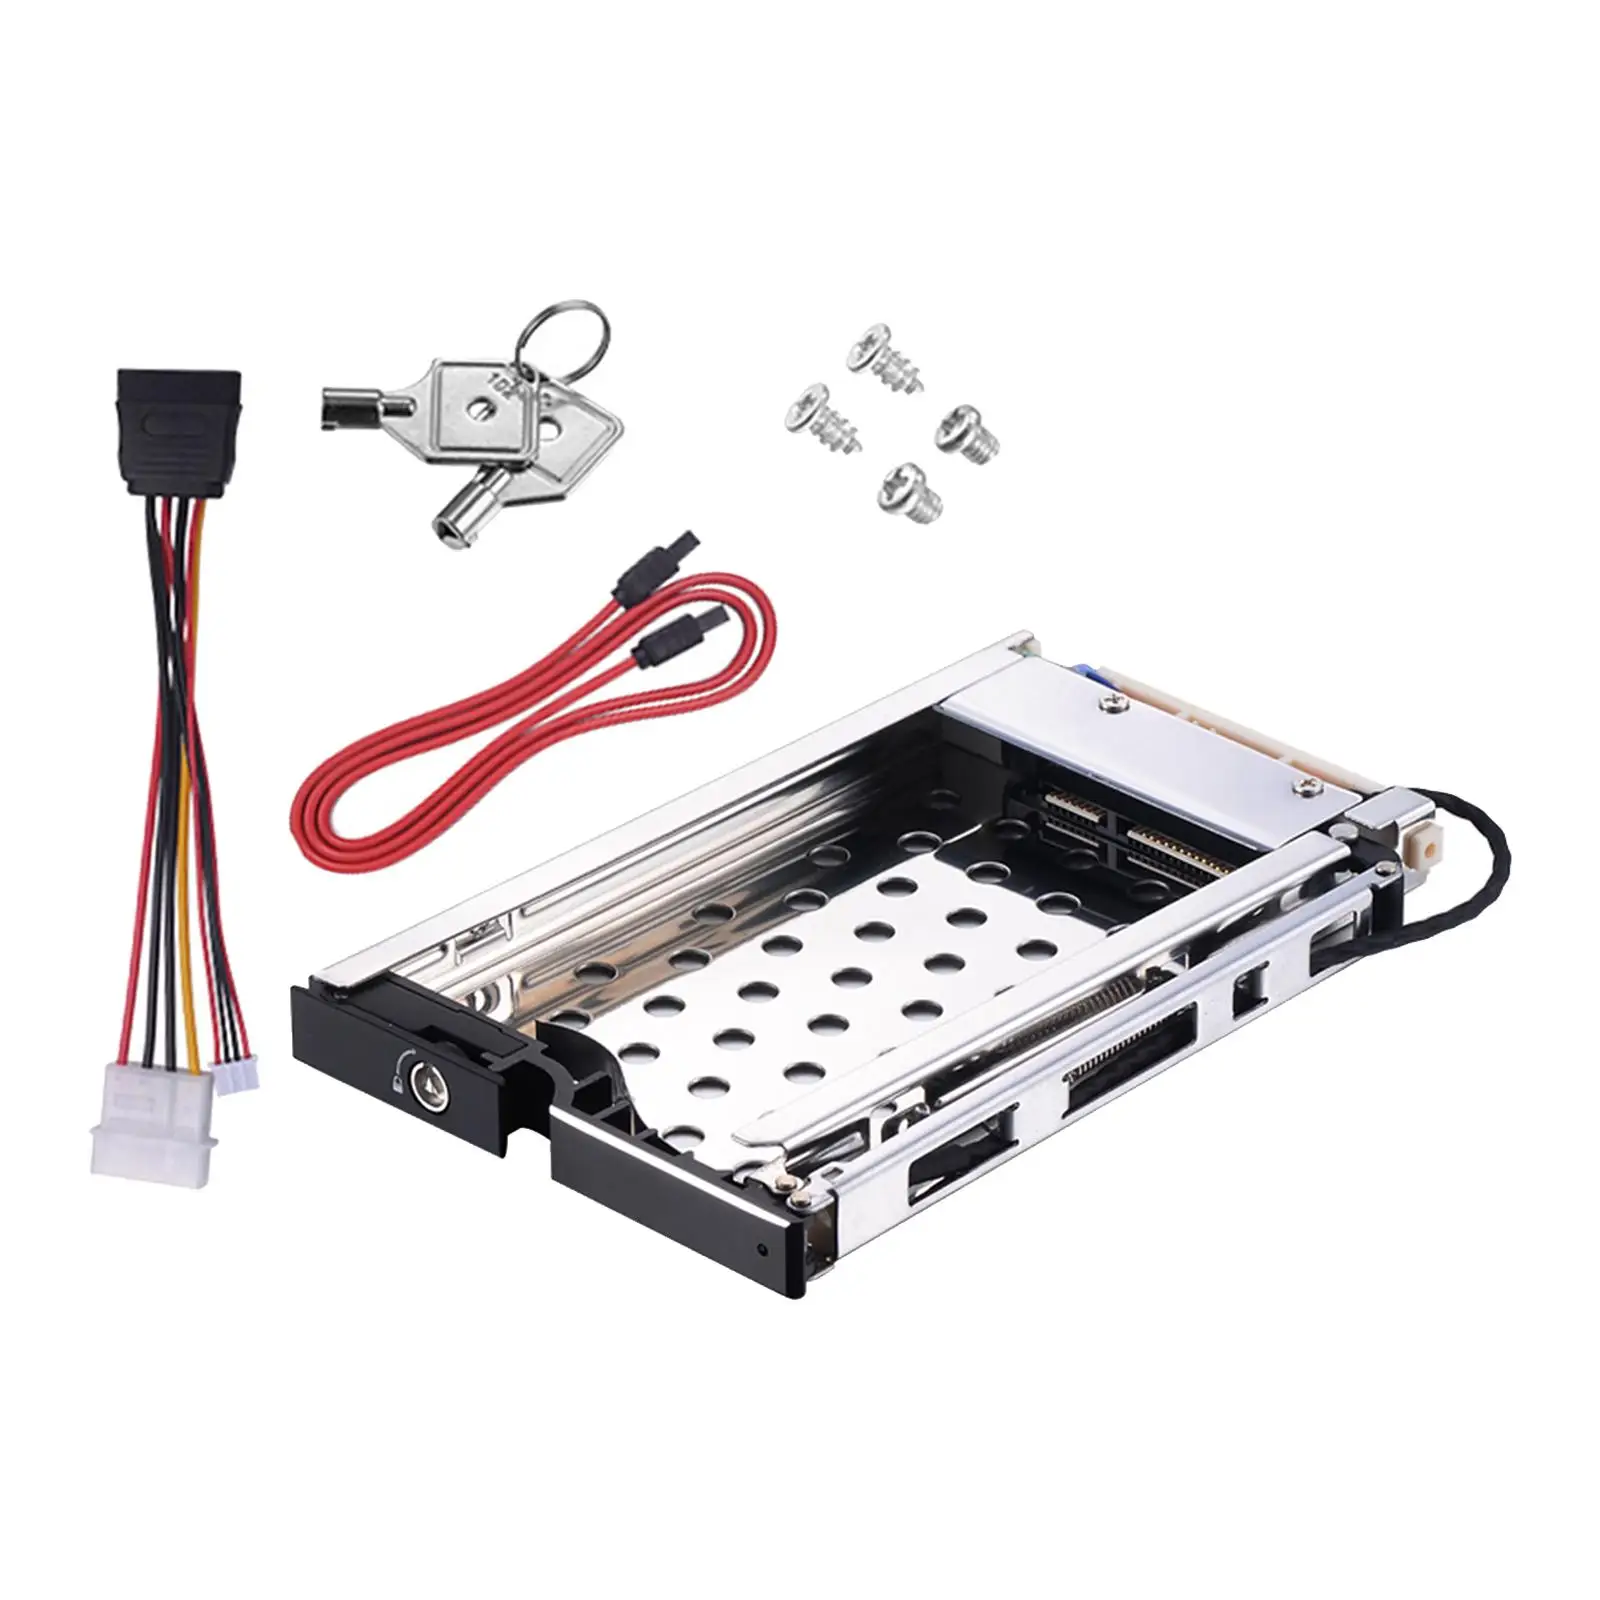 2.5 inch SSD HDD Holder Tool Free Front LED Indicator Internal Drive Bay for 2.5`` 9.5mm HDD SSD Computer Computer Accessories